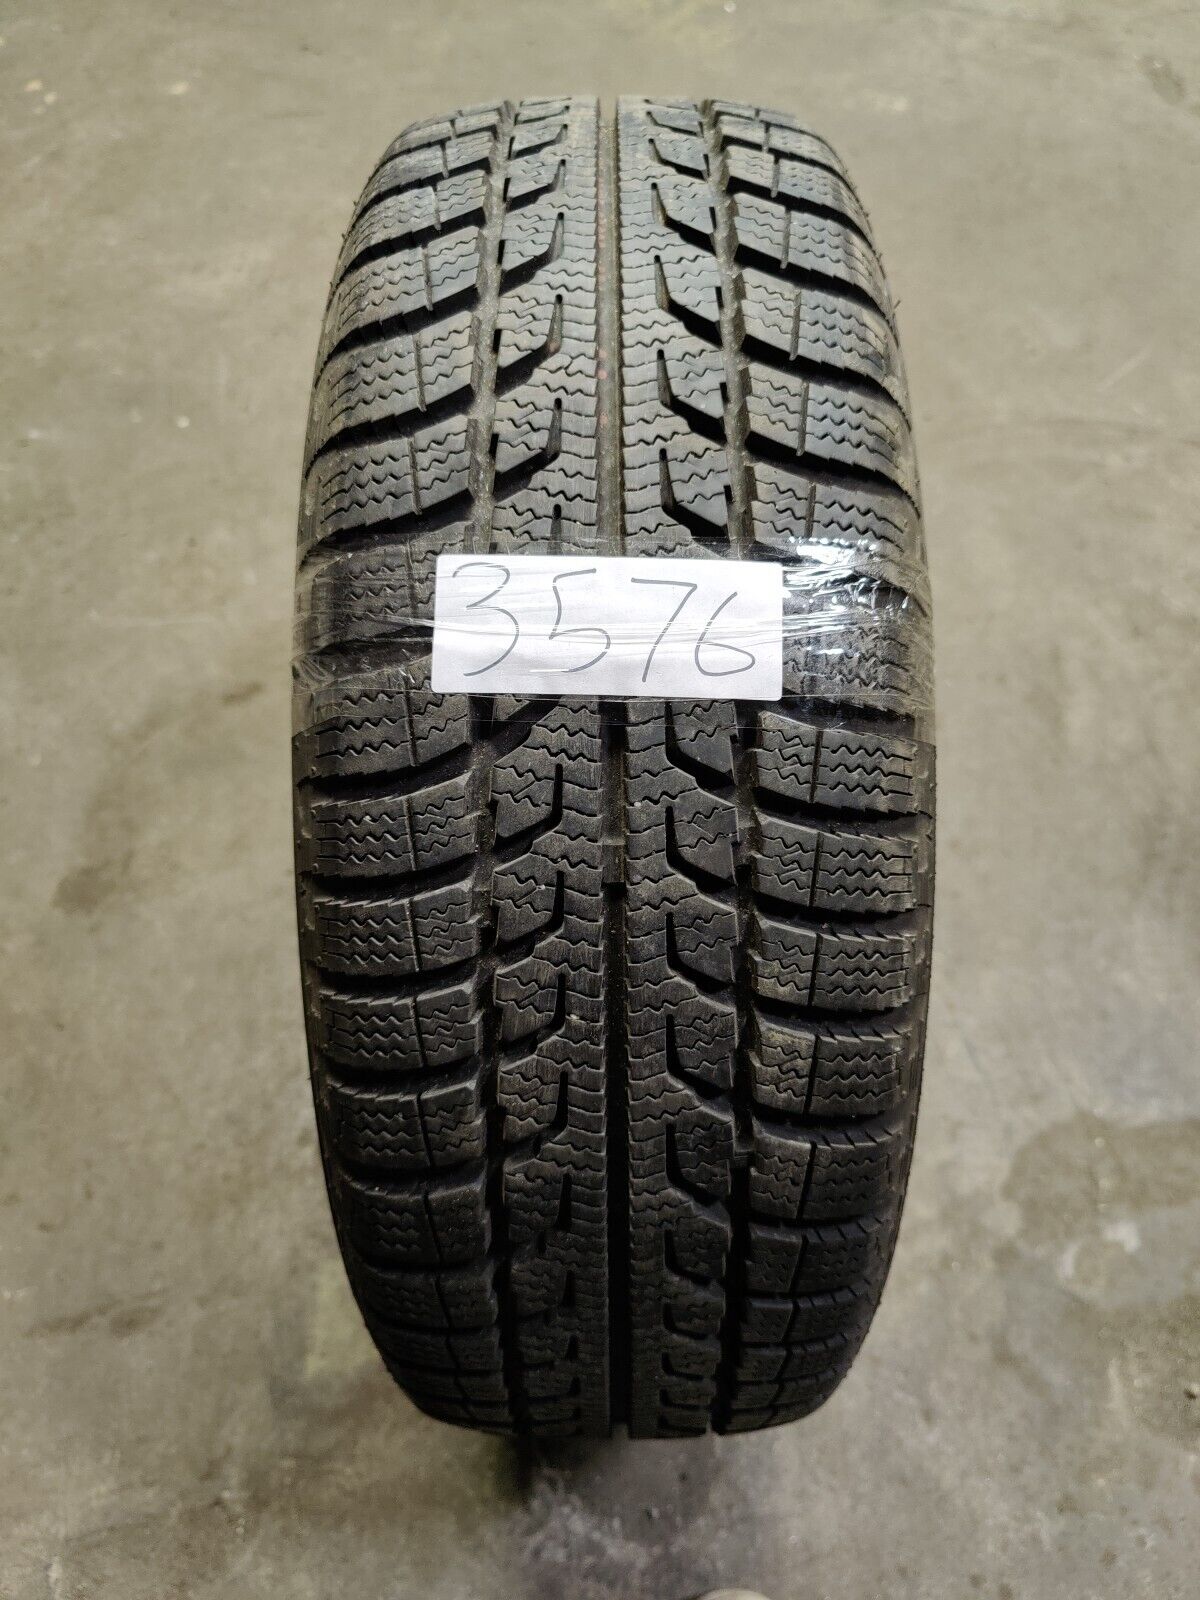 175/55 R15 Meteor Used 7.1mm (3576)  free fit available